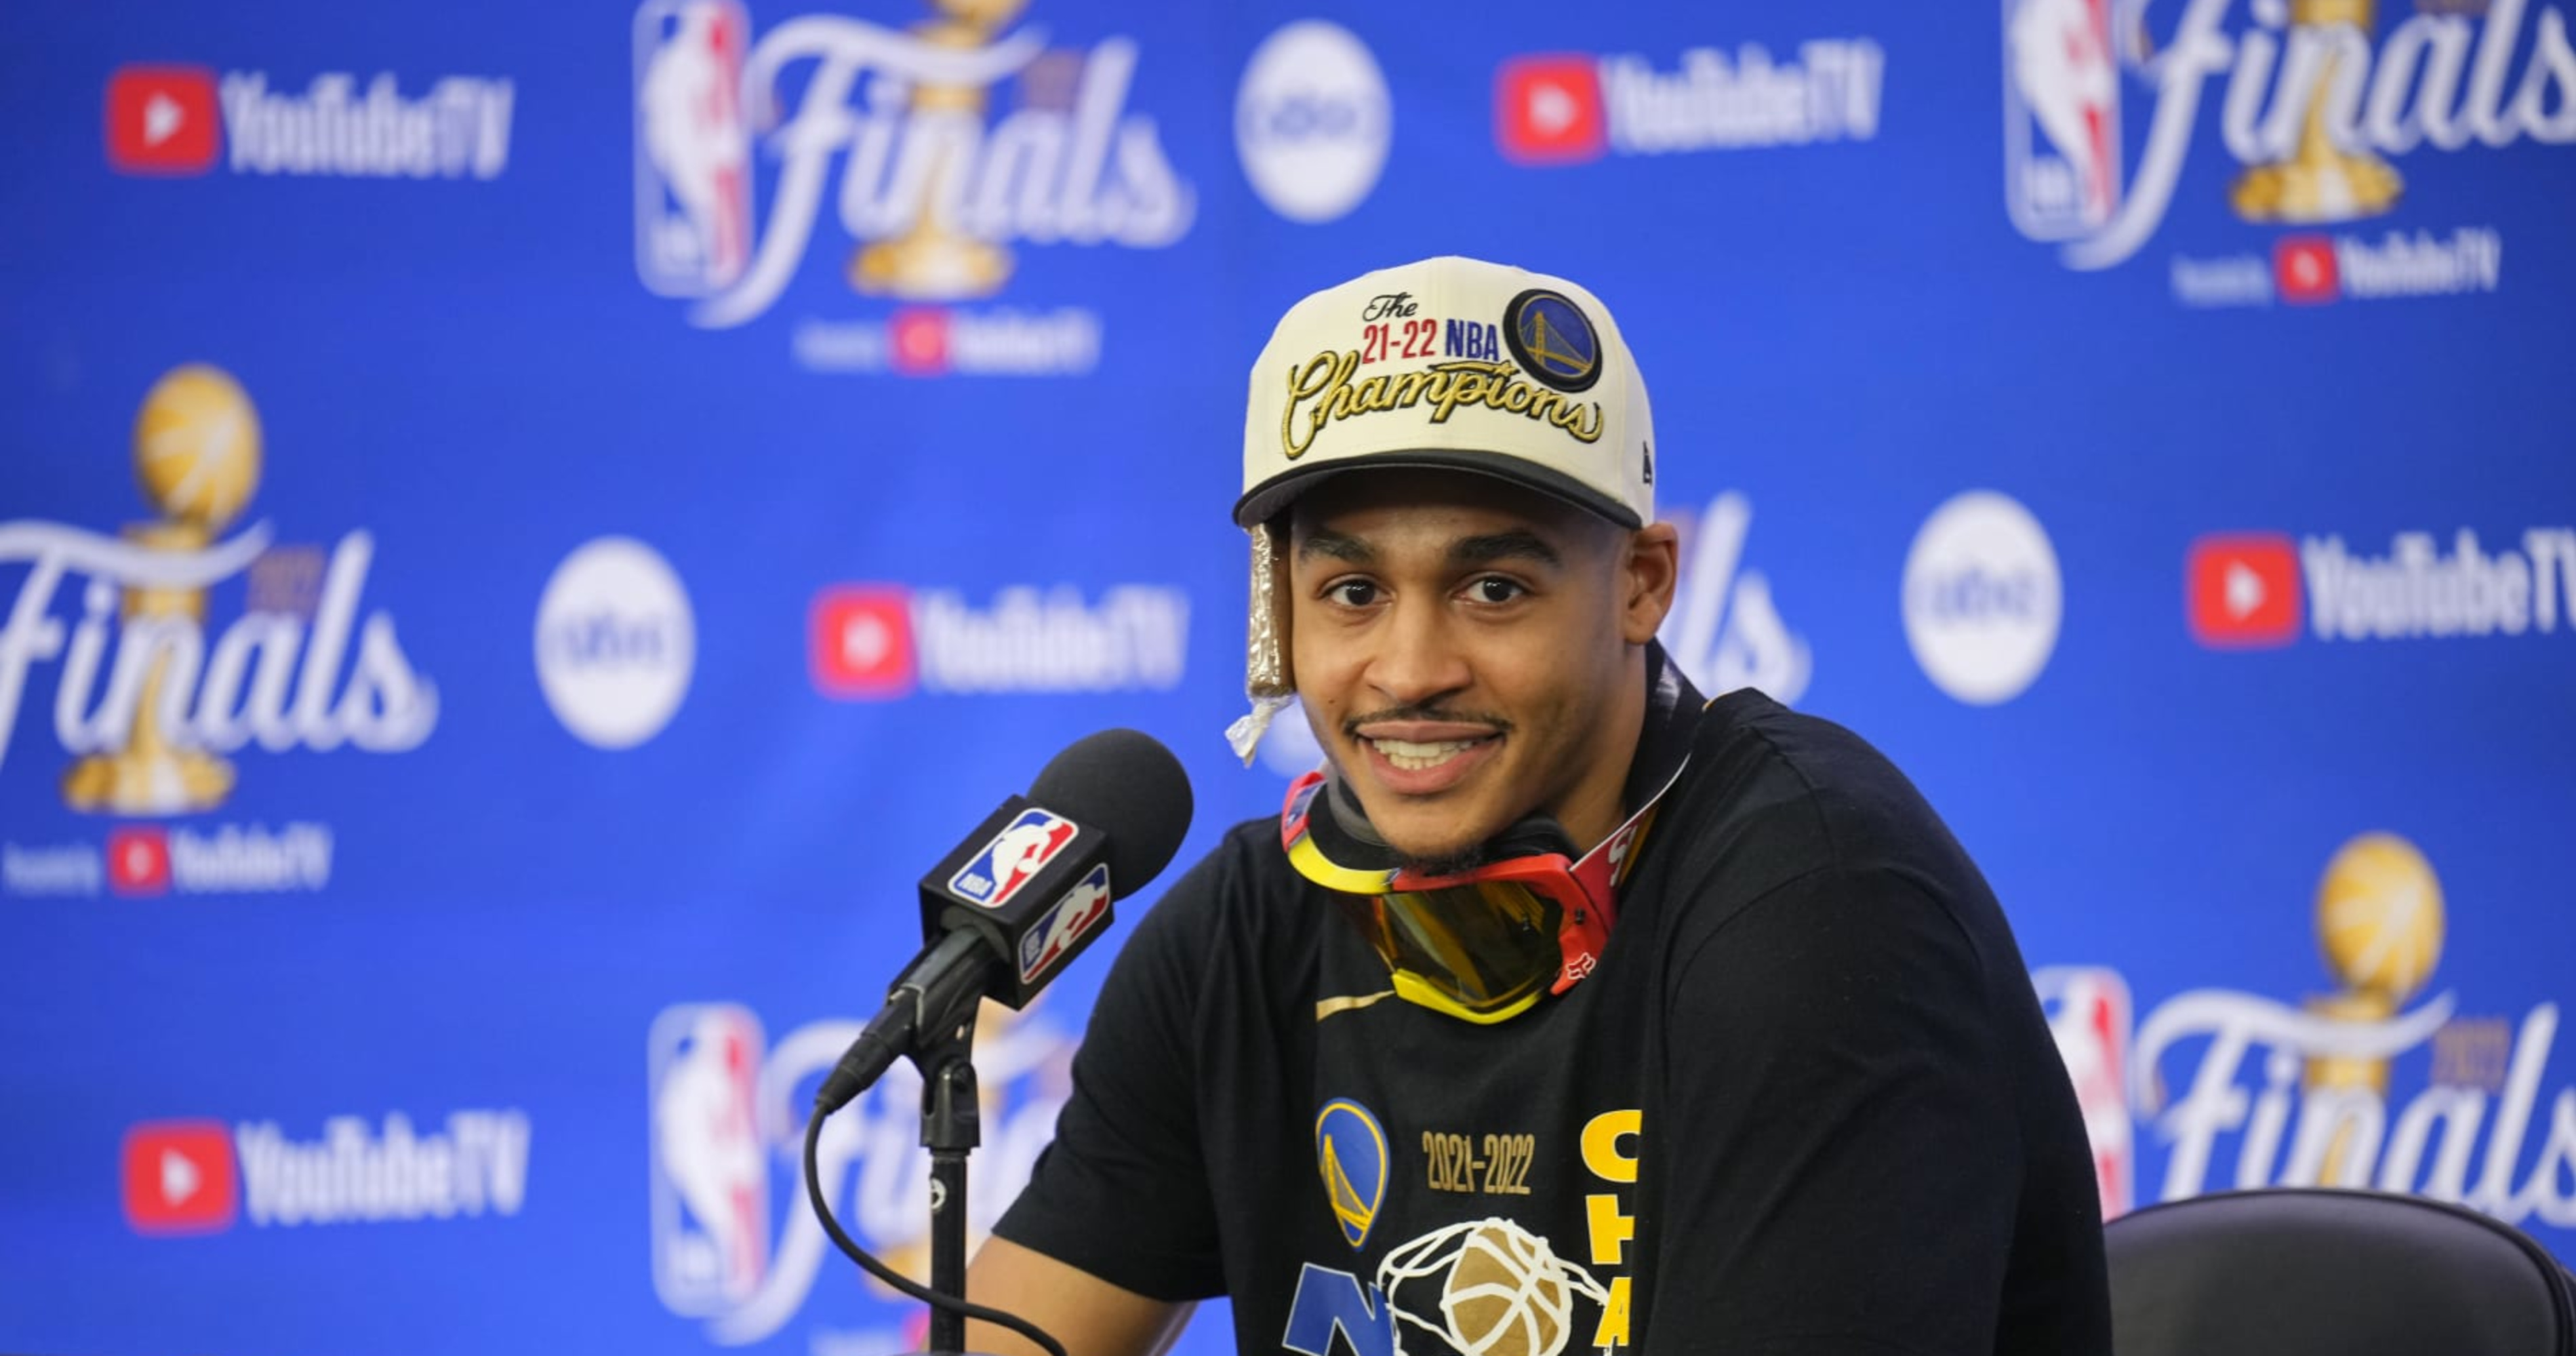 Highlights from Jordan Poole's introductory Golden State news conference